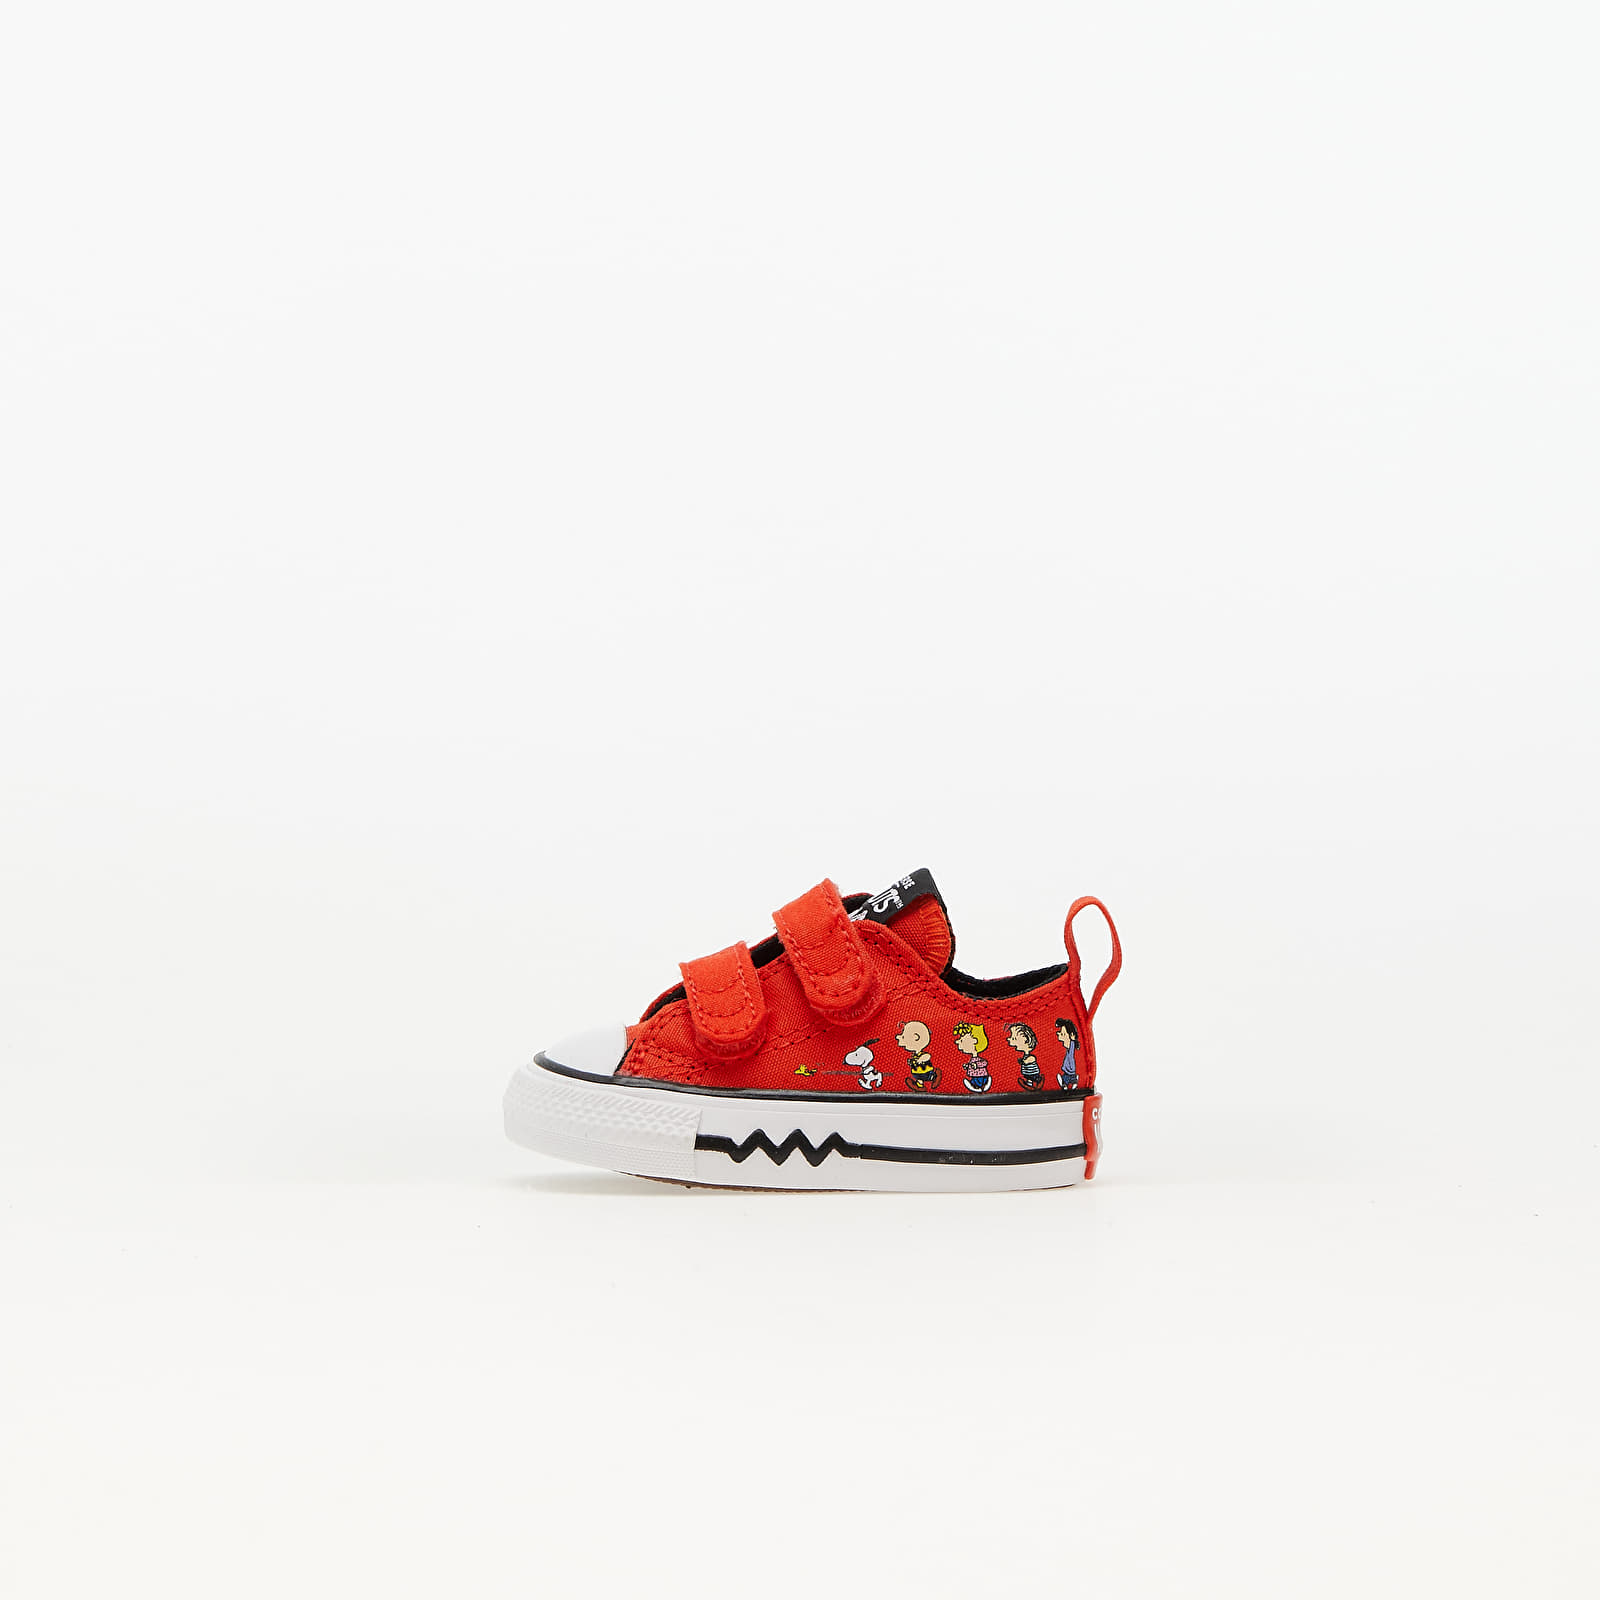 Chaussures et baskets enfants Converse x Peanuts Chuck Taylor All Star 2V Signal Red/ Black/ White